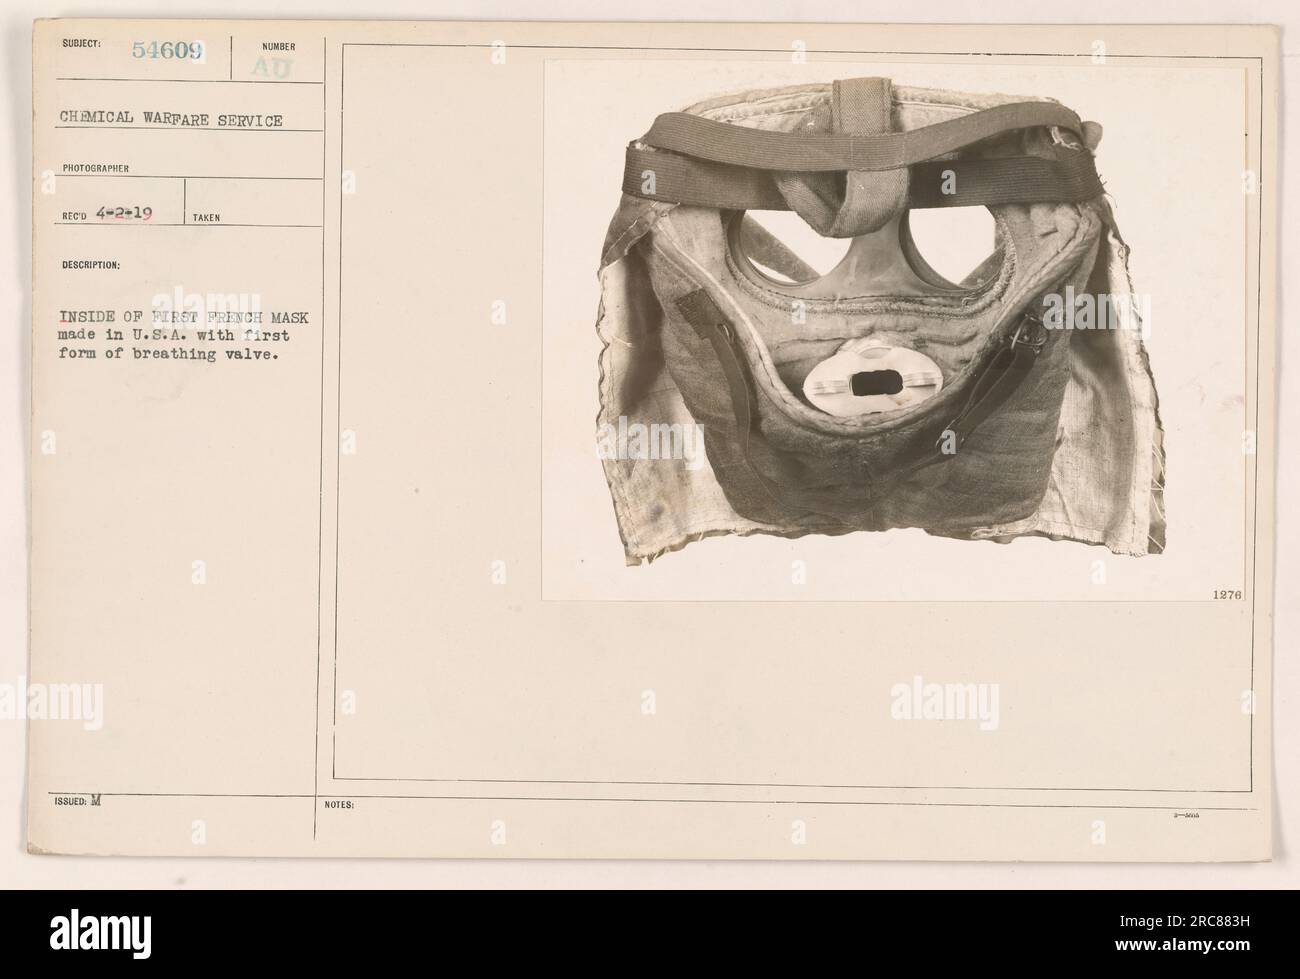 Interior of the first French mask produced in the United States during World War One. The mask features the initial design of a breathing valve. Photographed on April 2nd, 1919, by Reed of the Chemical Warfare Service. This image corresponds to the number 54609 in the series and carries the designation 'AU Issued.' Stock Photo